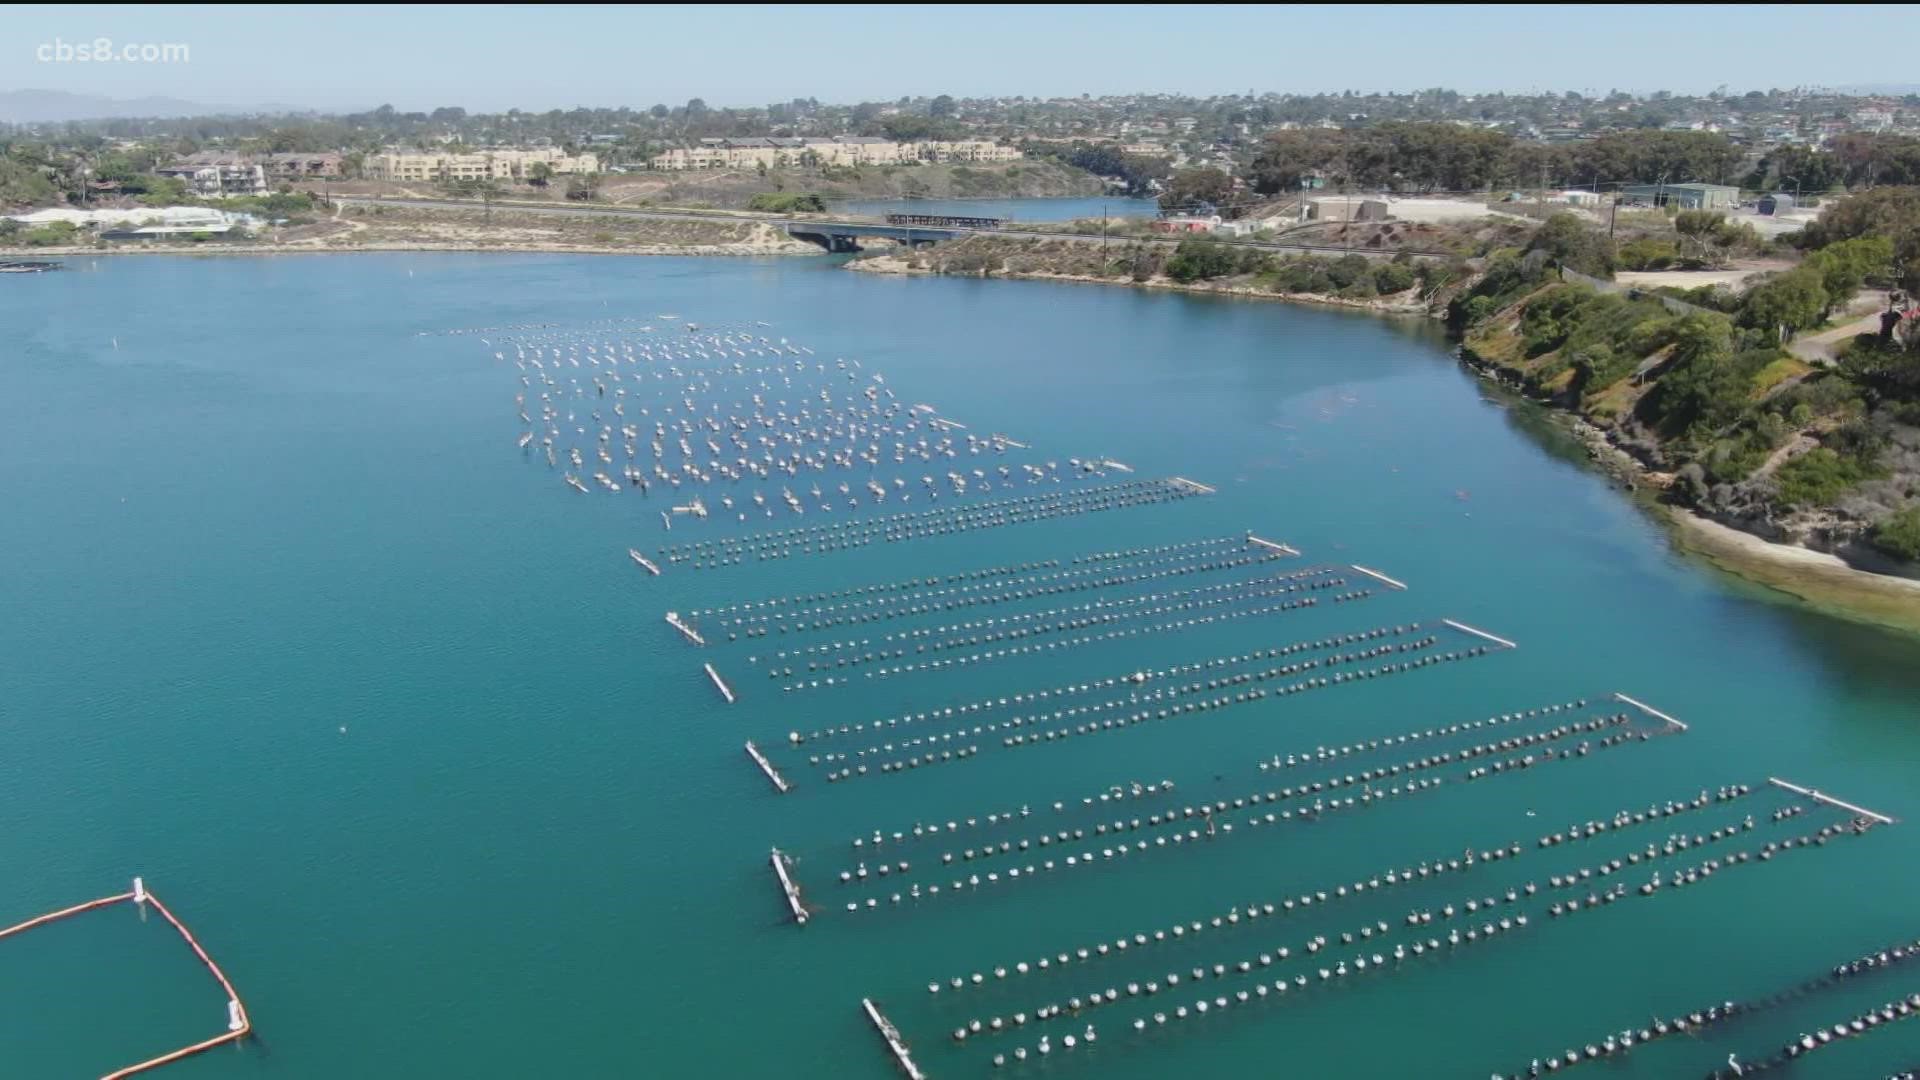 The Carlsbad Aquafarm sits between the Pacific Ocean and I-5, in the calm and fairly clear waters of the Agua Hedionda Lagoon.